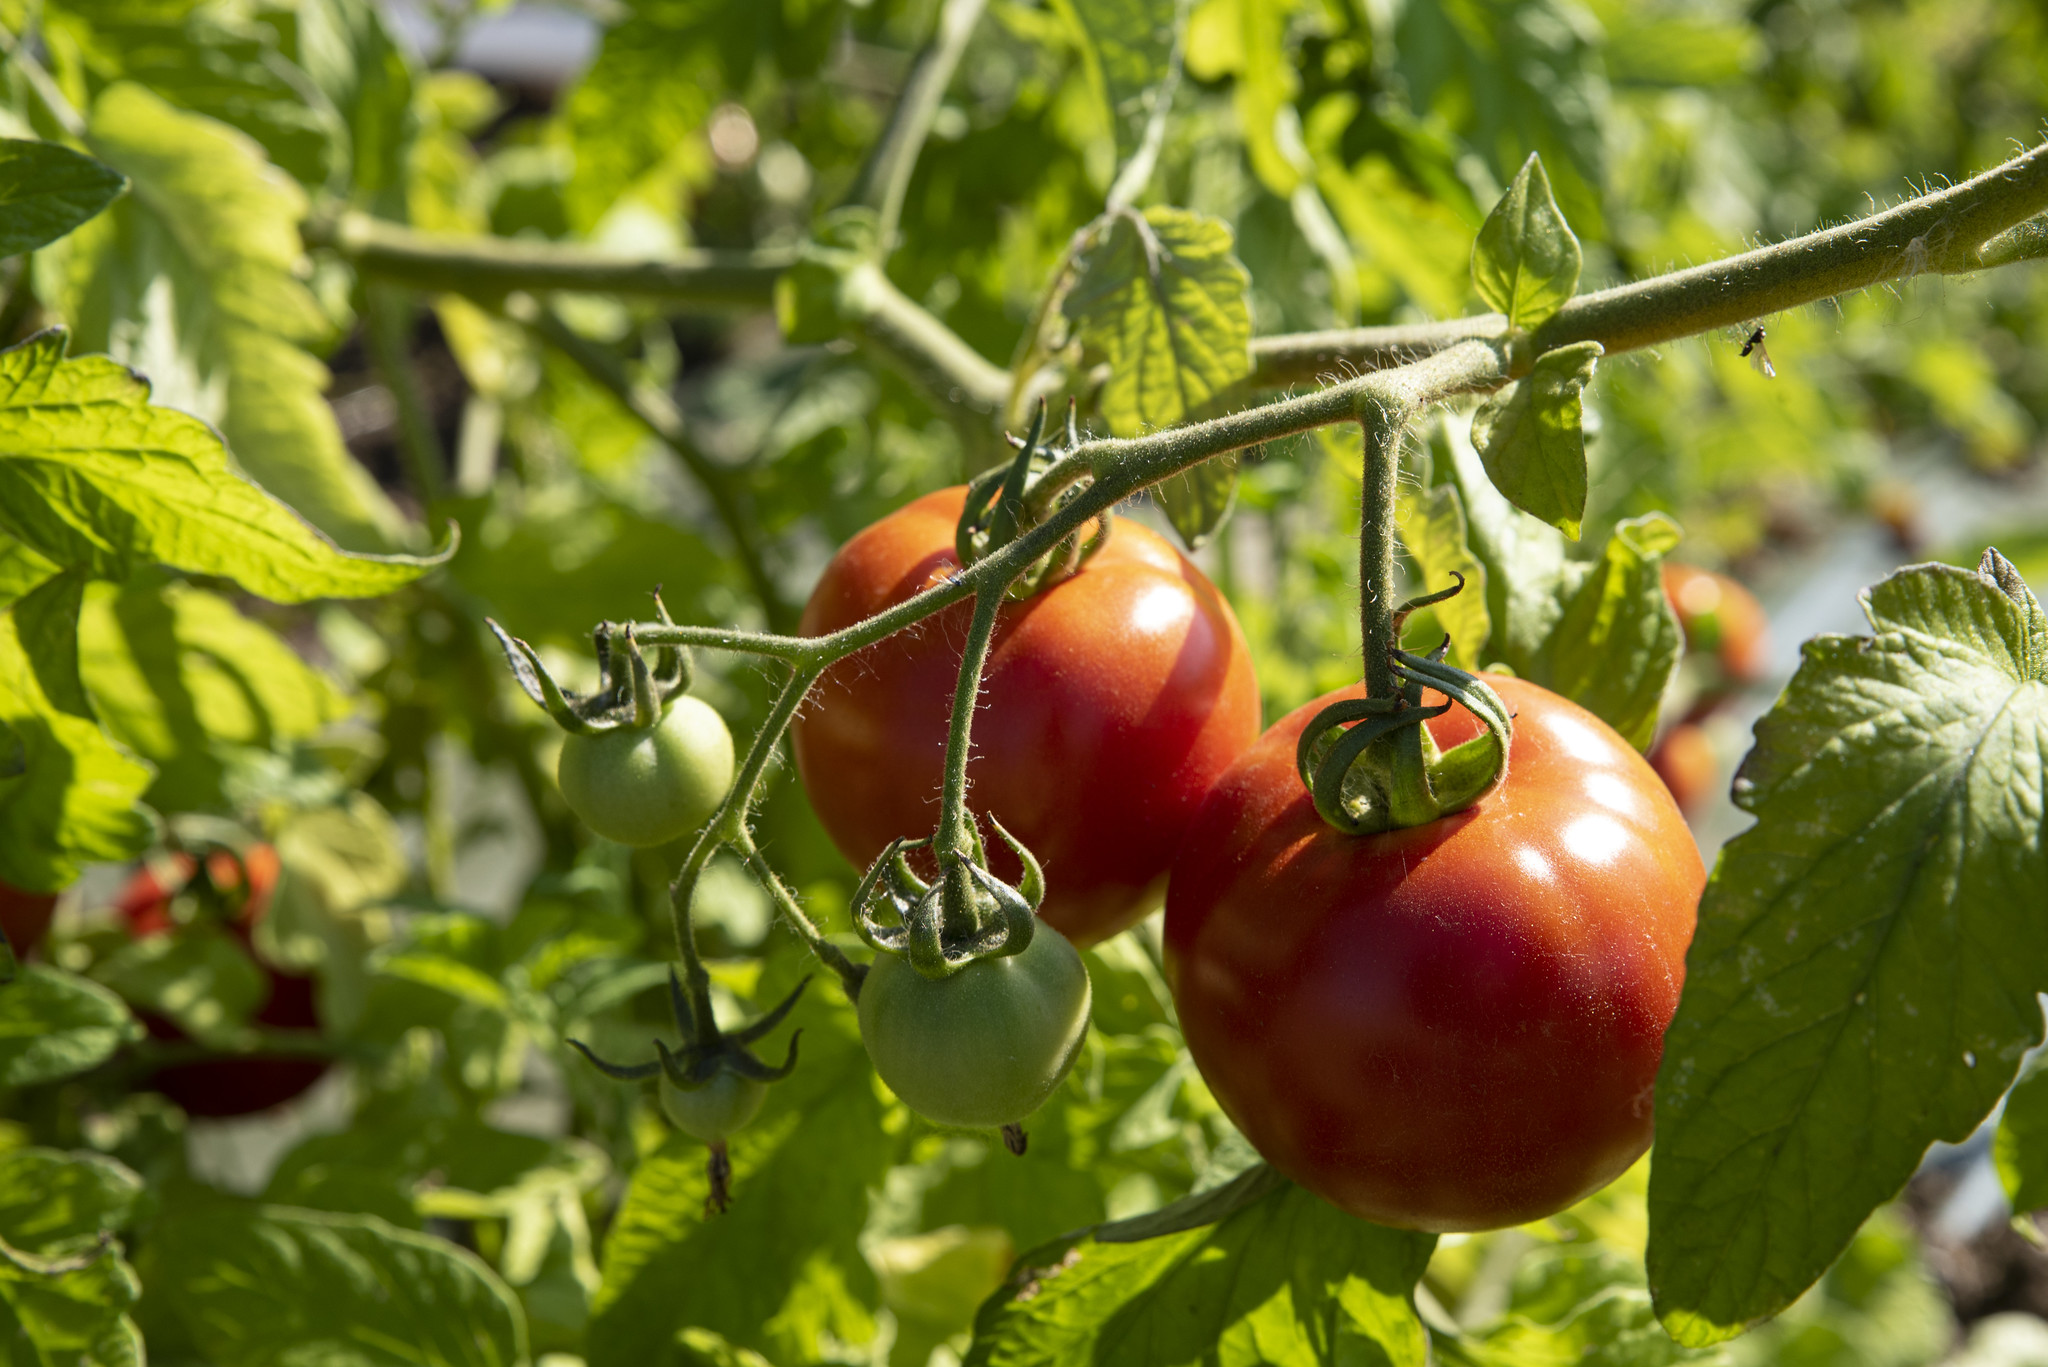 Tomato lovers: Grow the best by recognizing and solving common problems